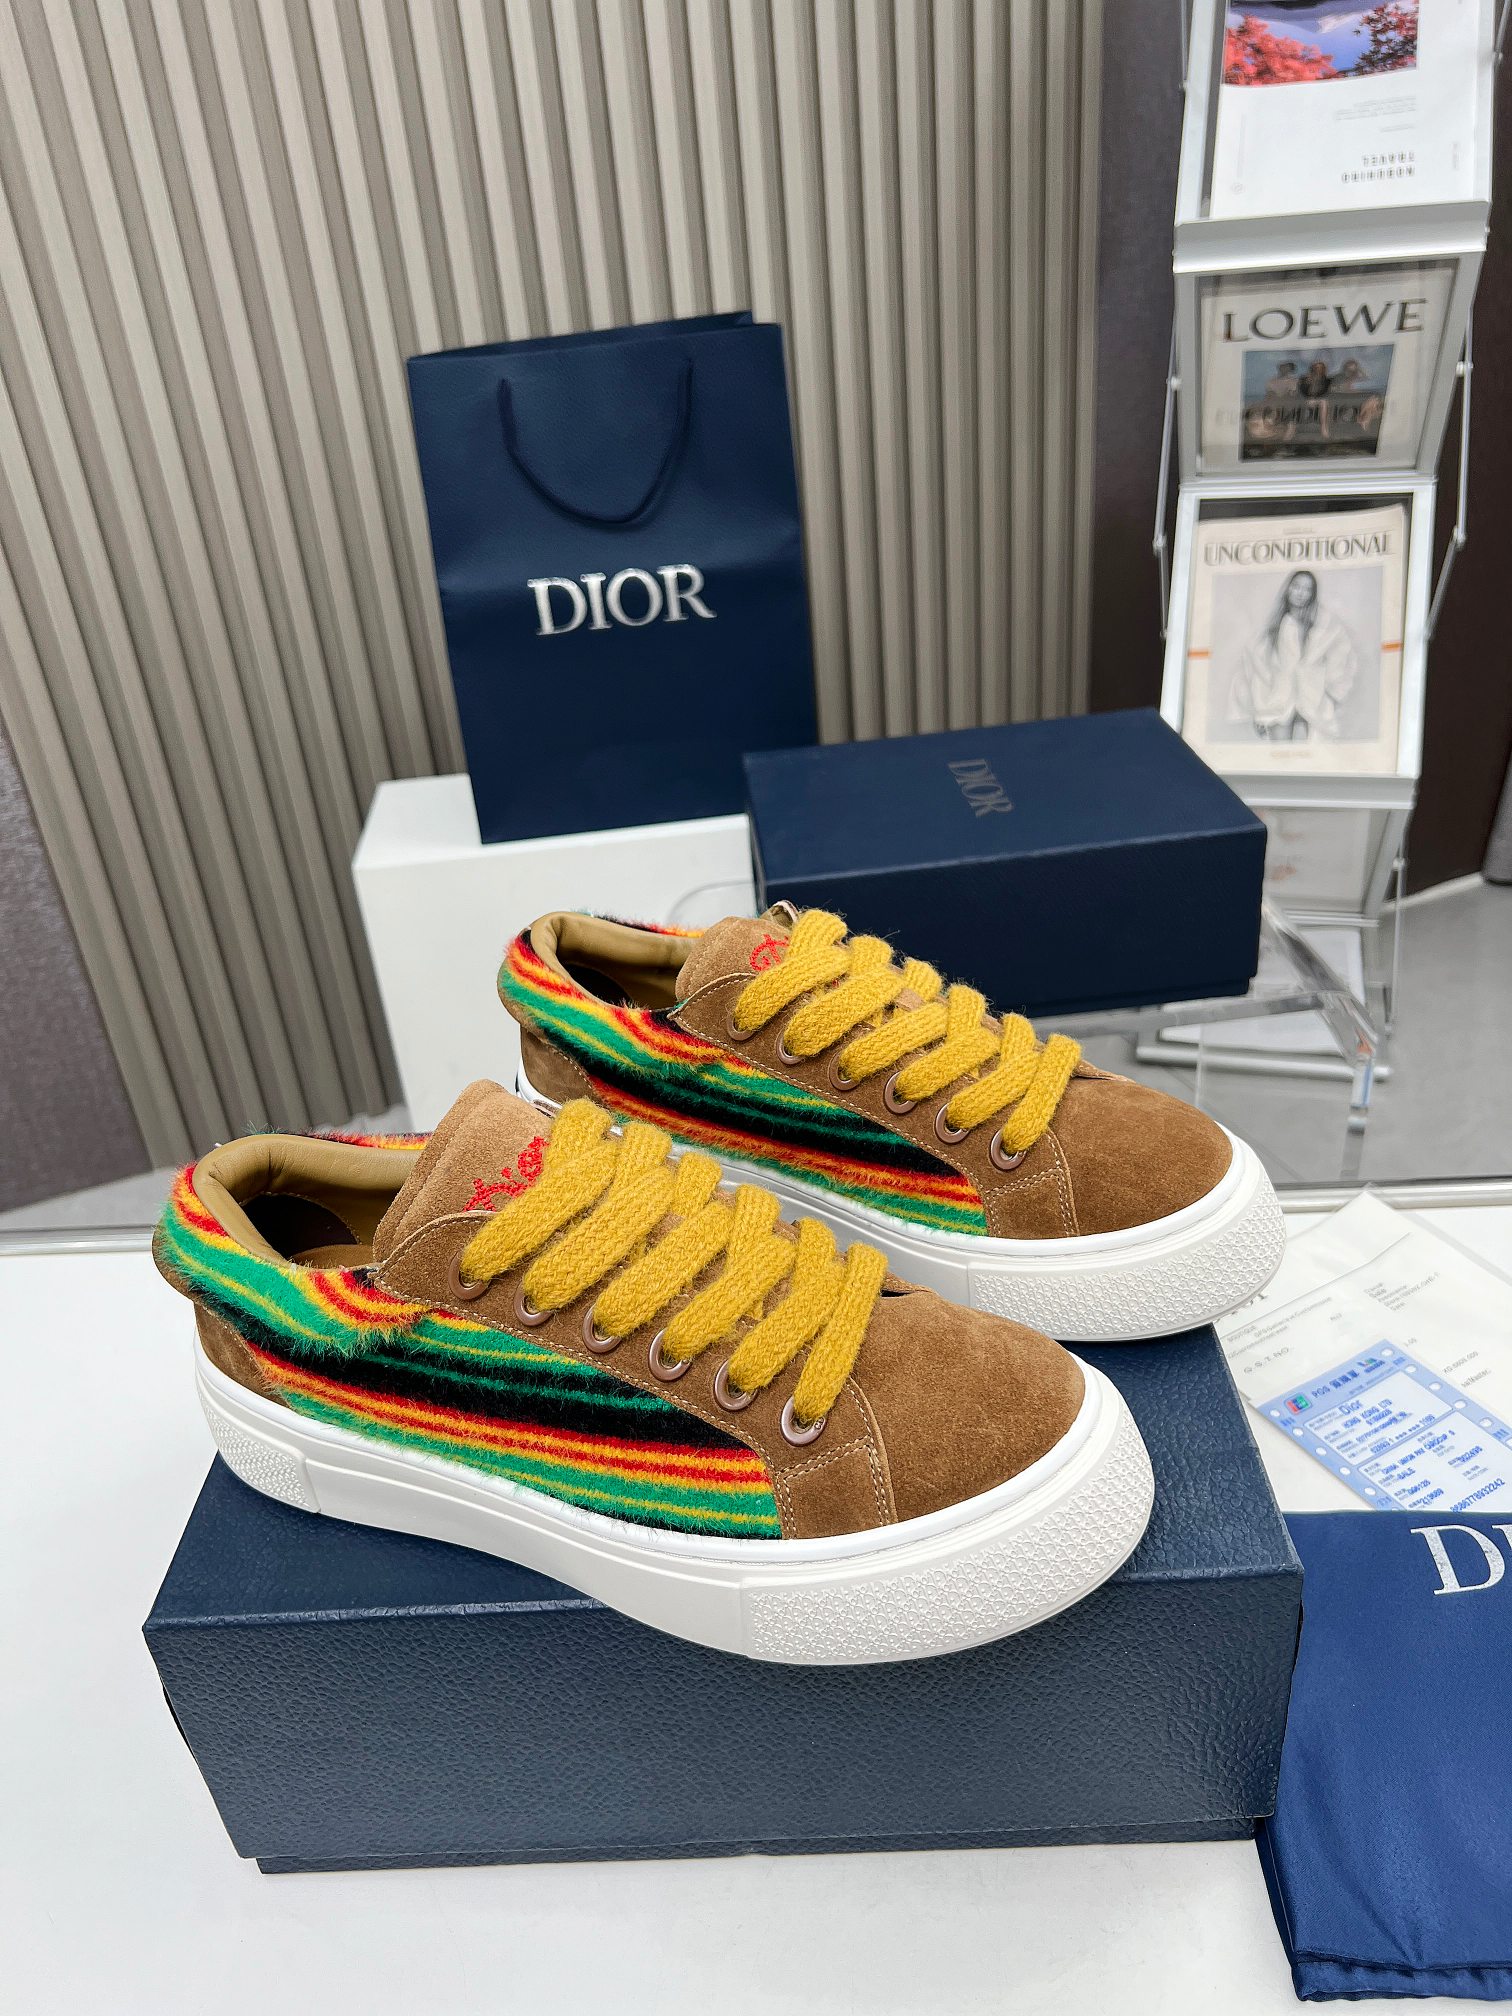 Dior Sneakers Single Layer Shoes Luxury Fashion Replica Designers
 Brown White Yellow Embroidery Unisex Women Men Cowhide Knitting Rubber Oblique Casual